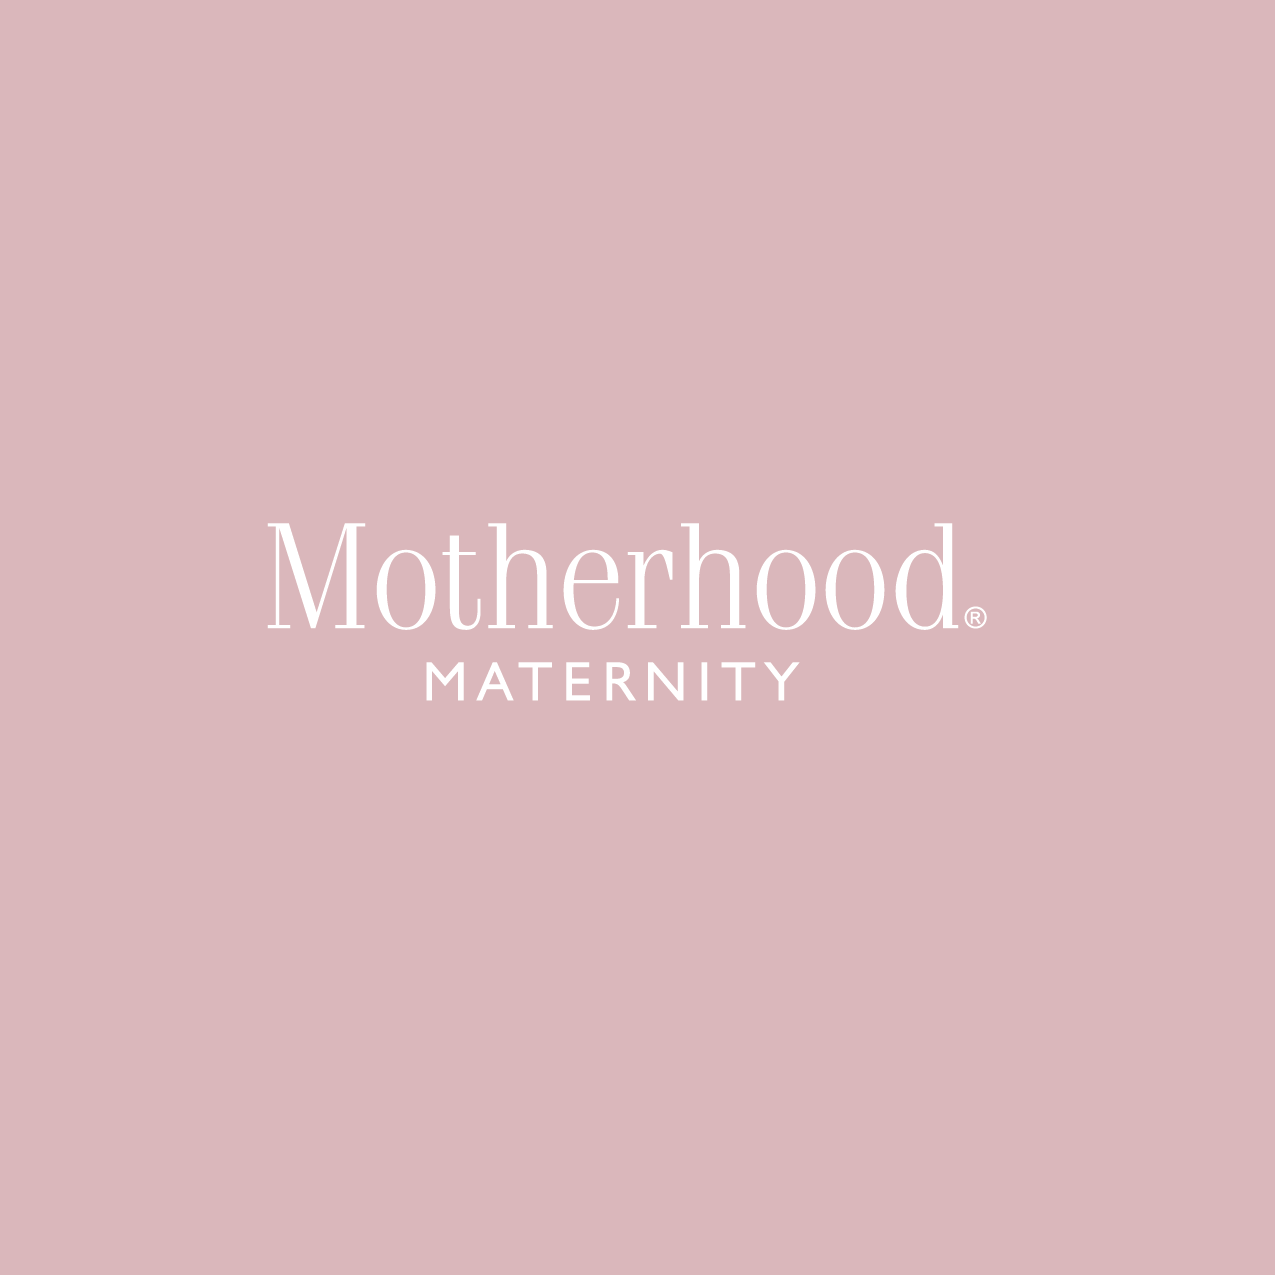 Motherhood Maternity Rental Reviews: Get All The Details At Hello  Subscription!